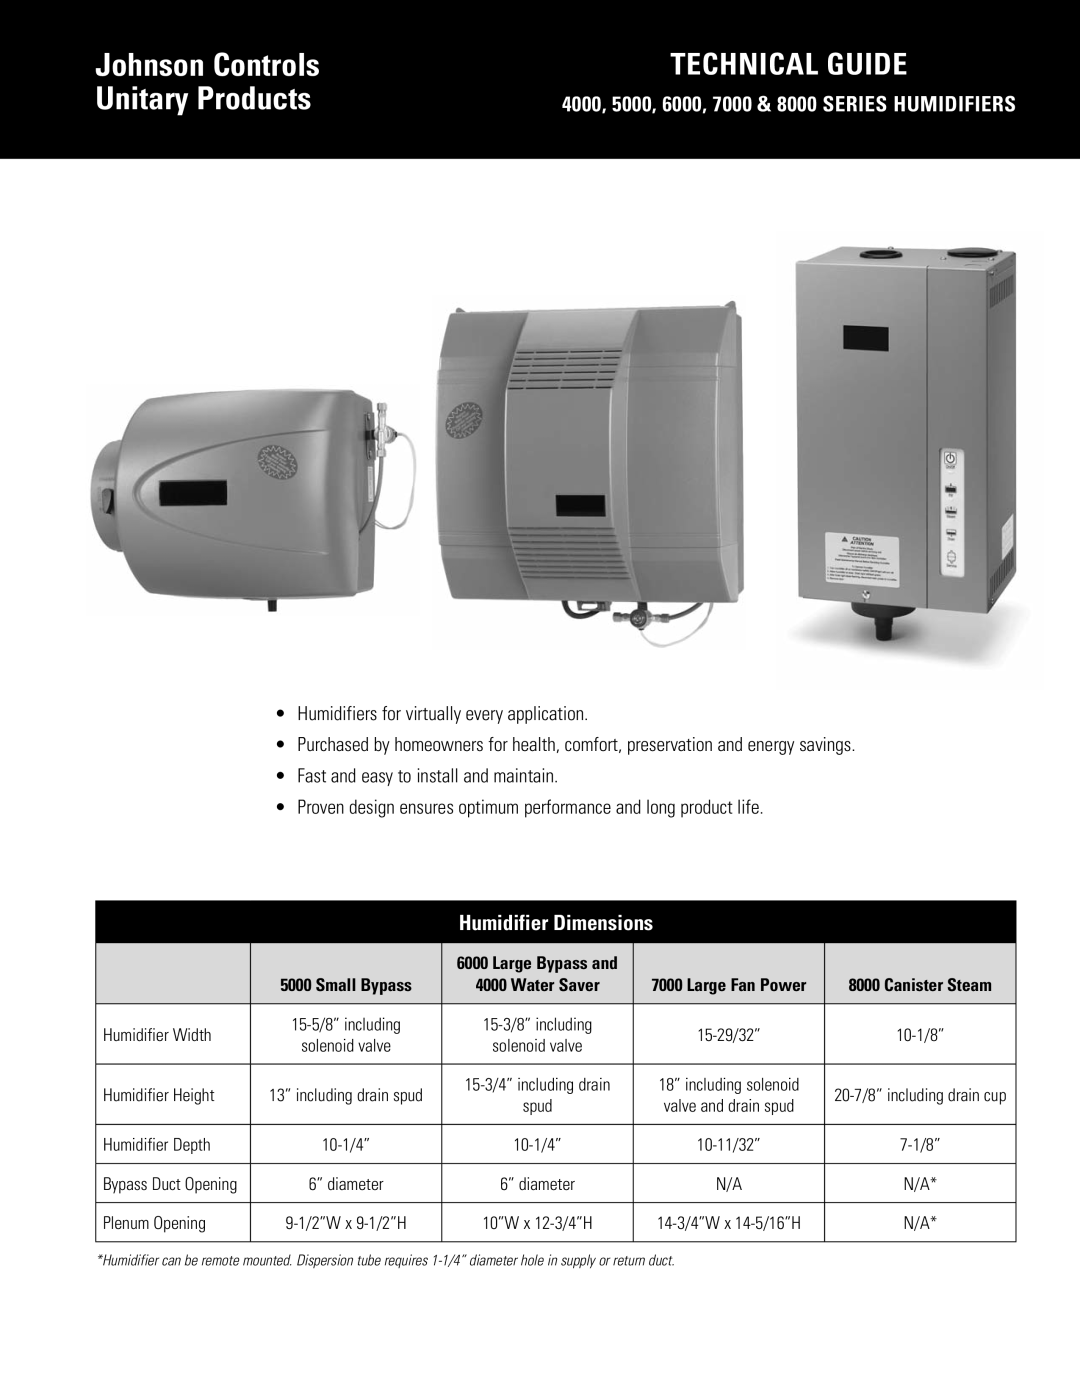 Johnson Controls 5000 dimensions Humidifier Dimensions, Humidifiers for virtually every application, Johnson Controls 